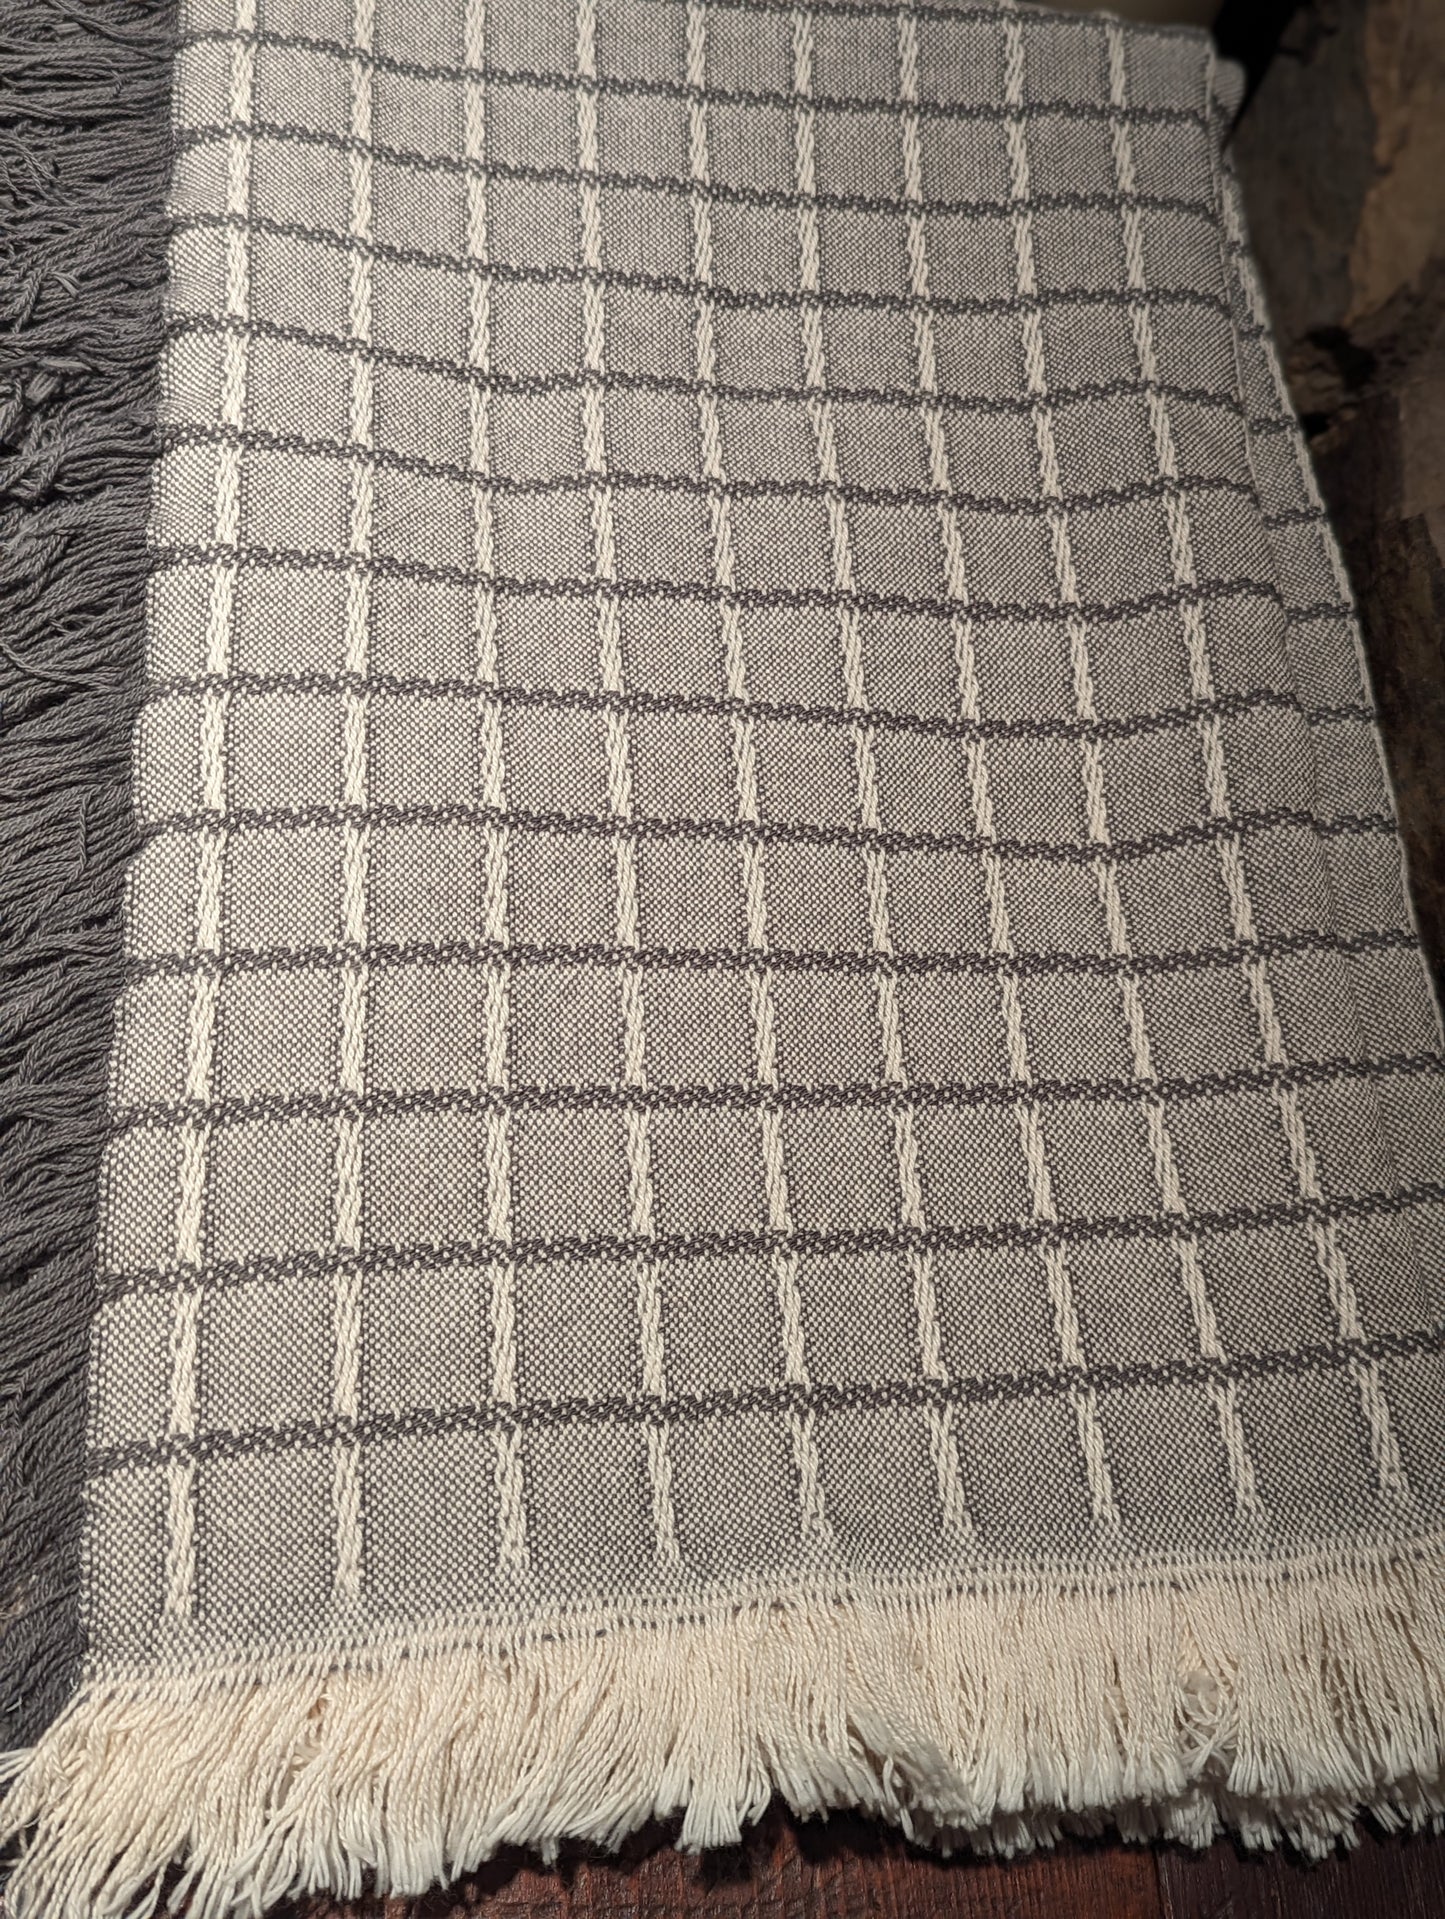 Exceptional Gray & White Woven Throw Blanket - Made in the USA